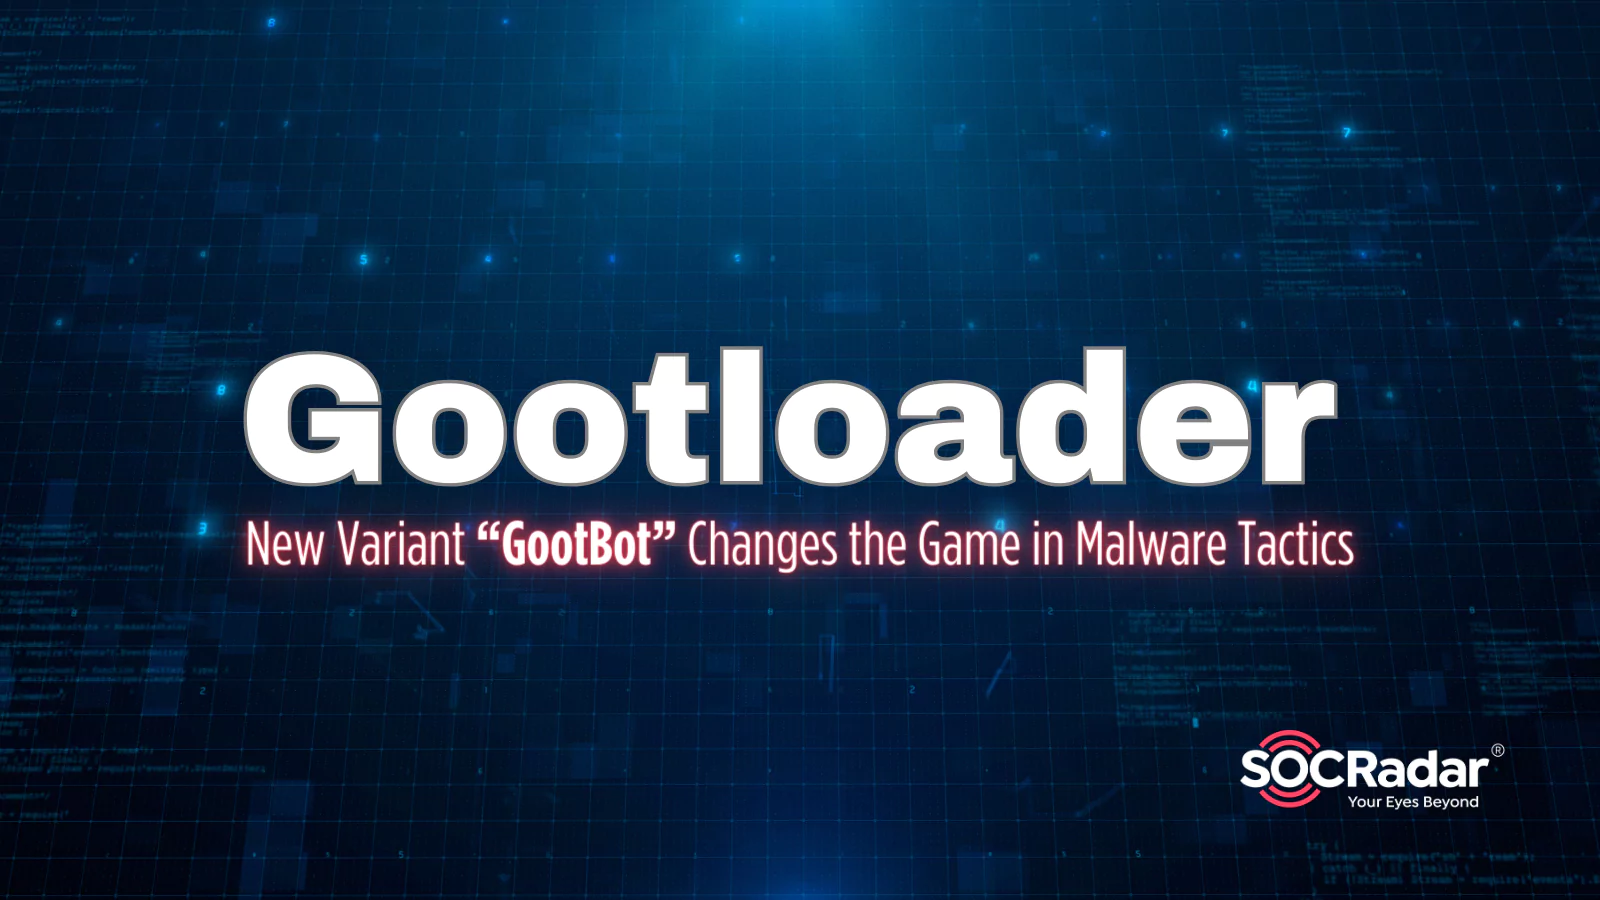 SOCRadar® Cyber Intelligence Inc. | New Gootloader Variant “GootBot” Changes the Game in Malware Tactics